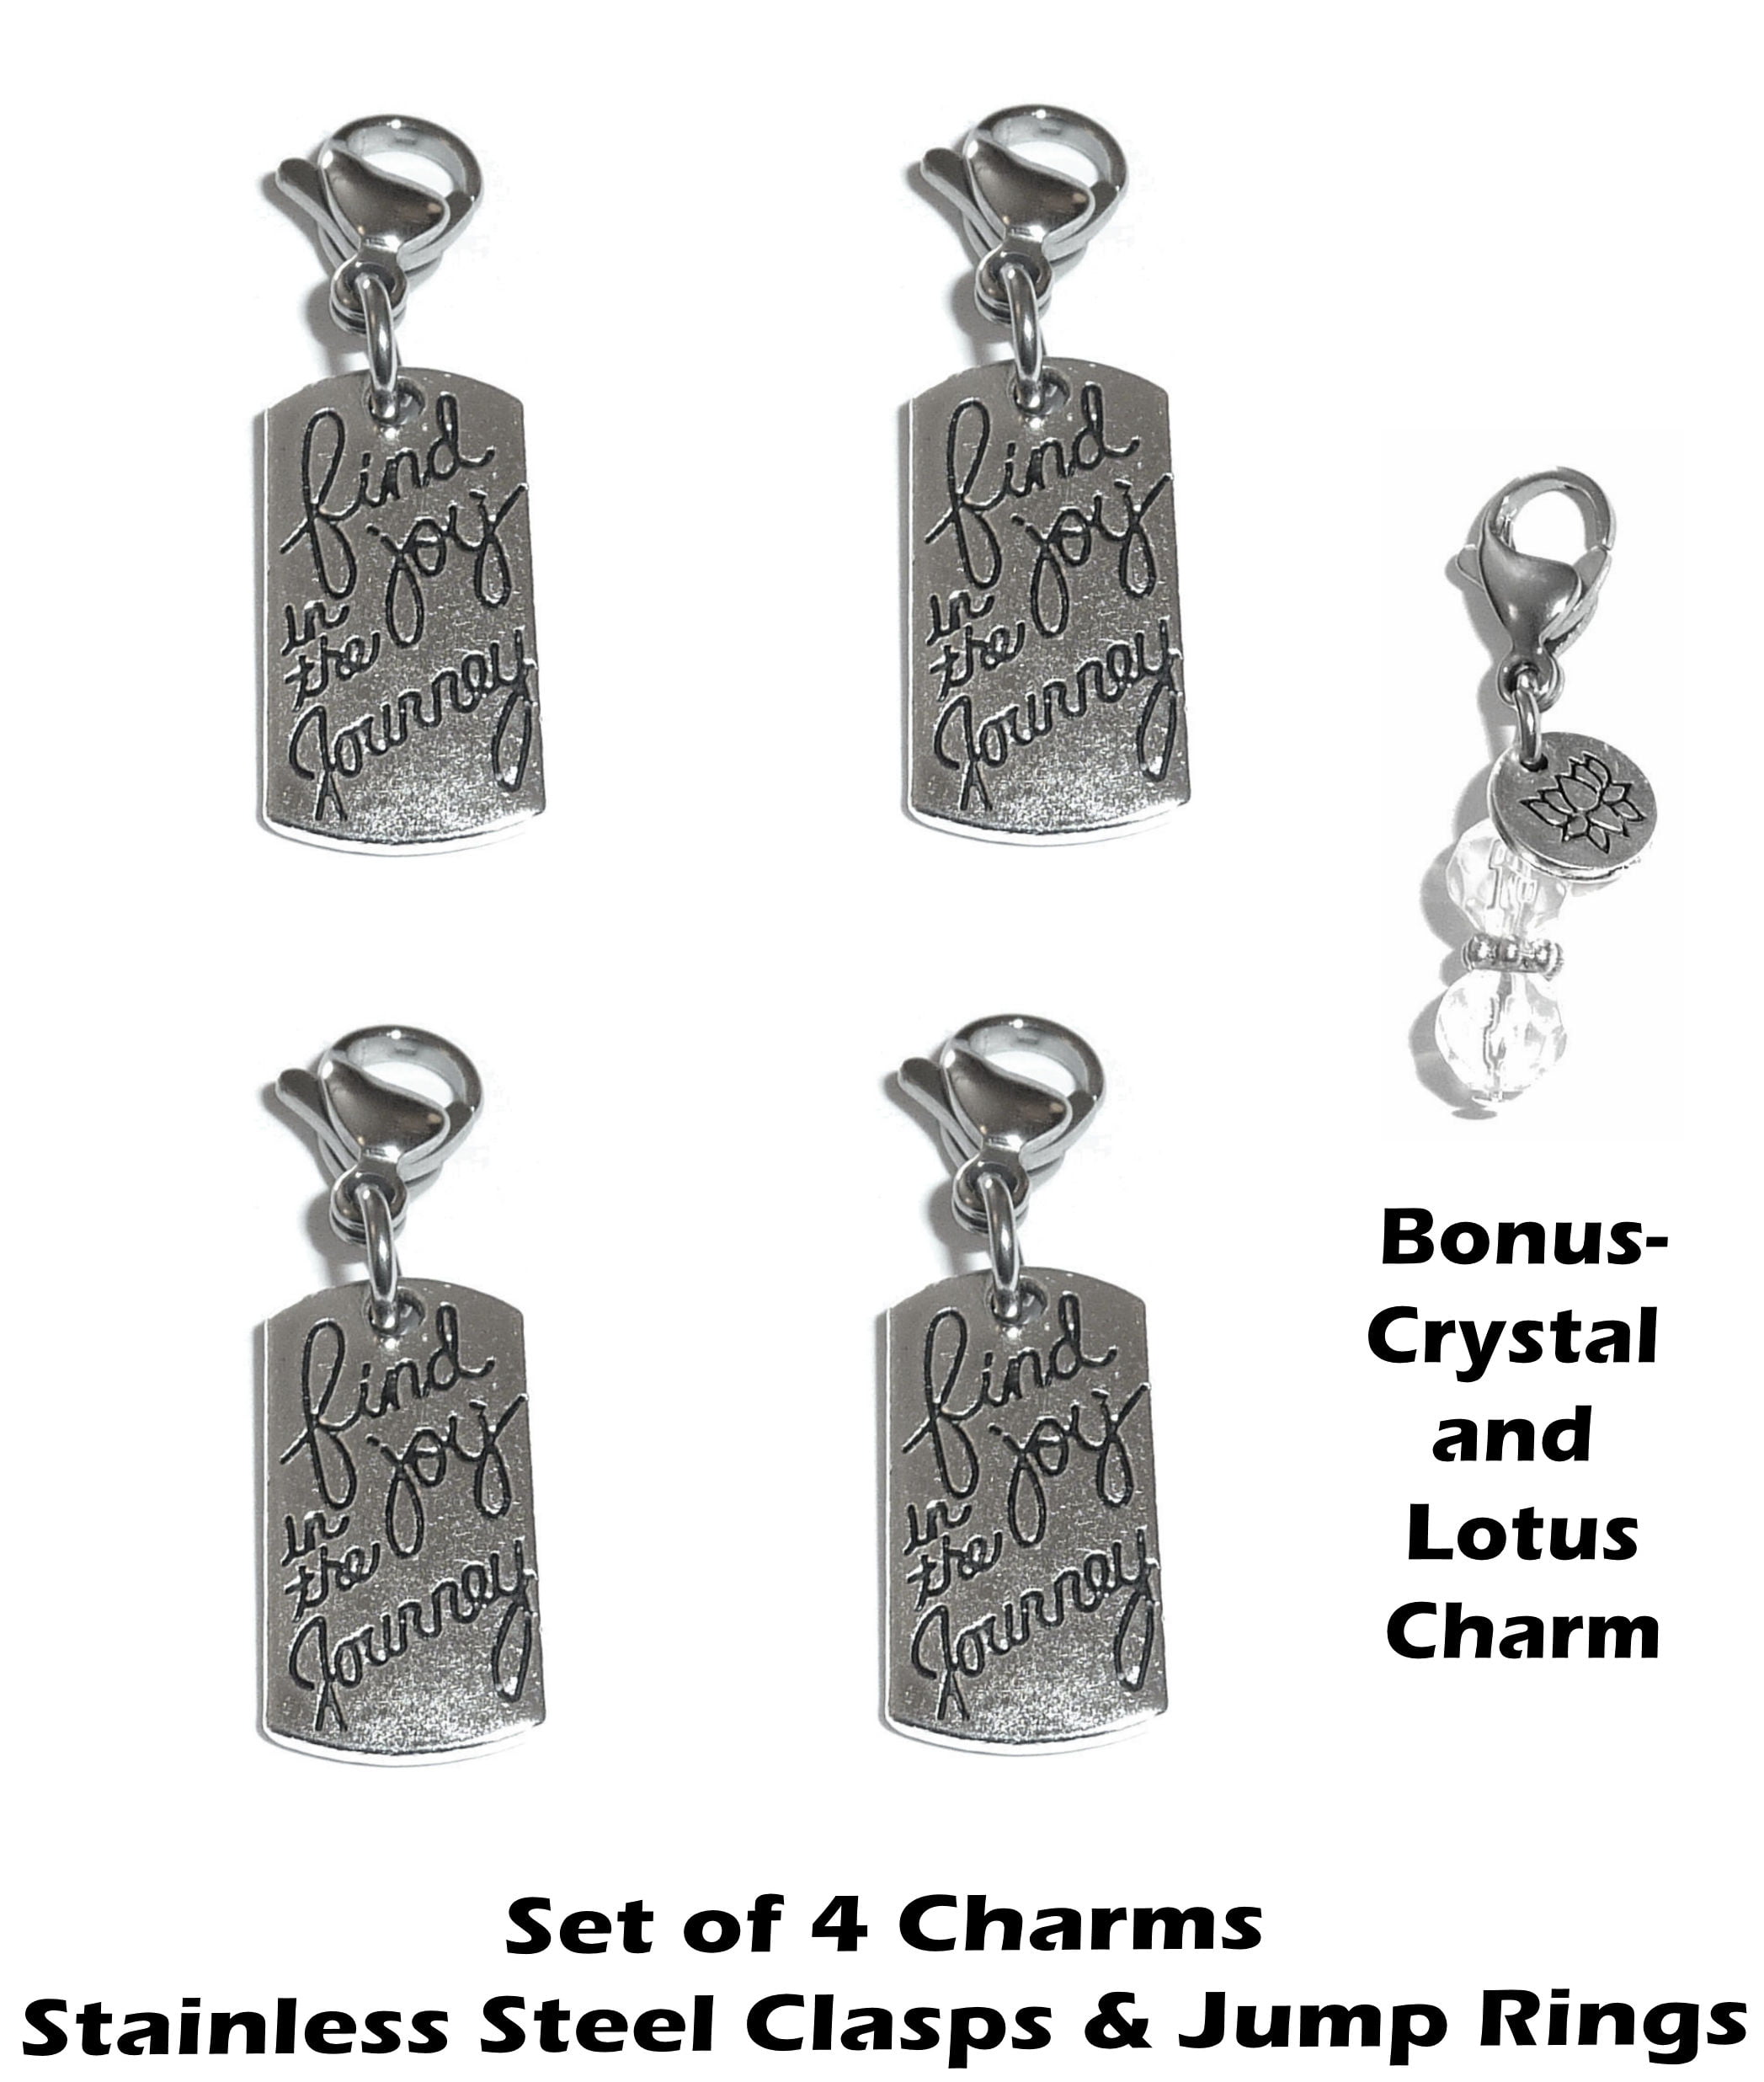 Charms Clip on - Perfect for Bracelet or Necklace, Zipper Pull Charm, Bag or Purse Charm Easy to Use DIY Charms - Joy Clip on Charm, Women's, Grey